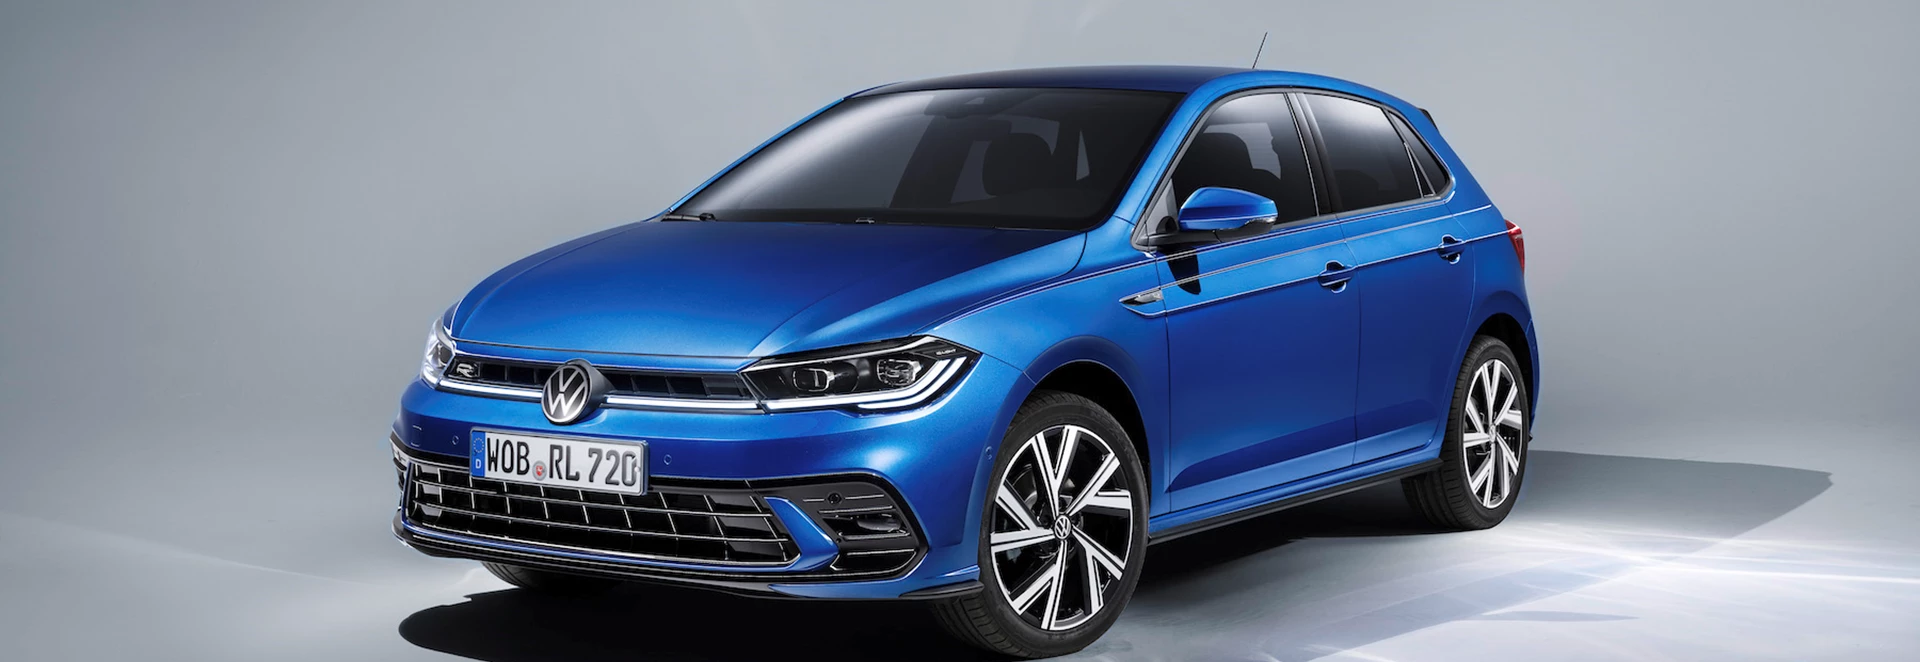 Updated Volkswagen Polo unveiled with revised styling and more technology 